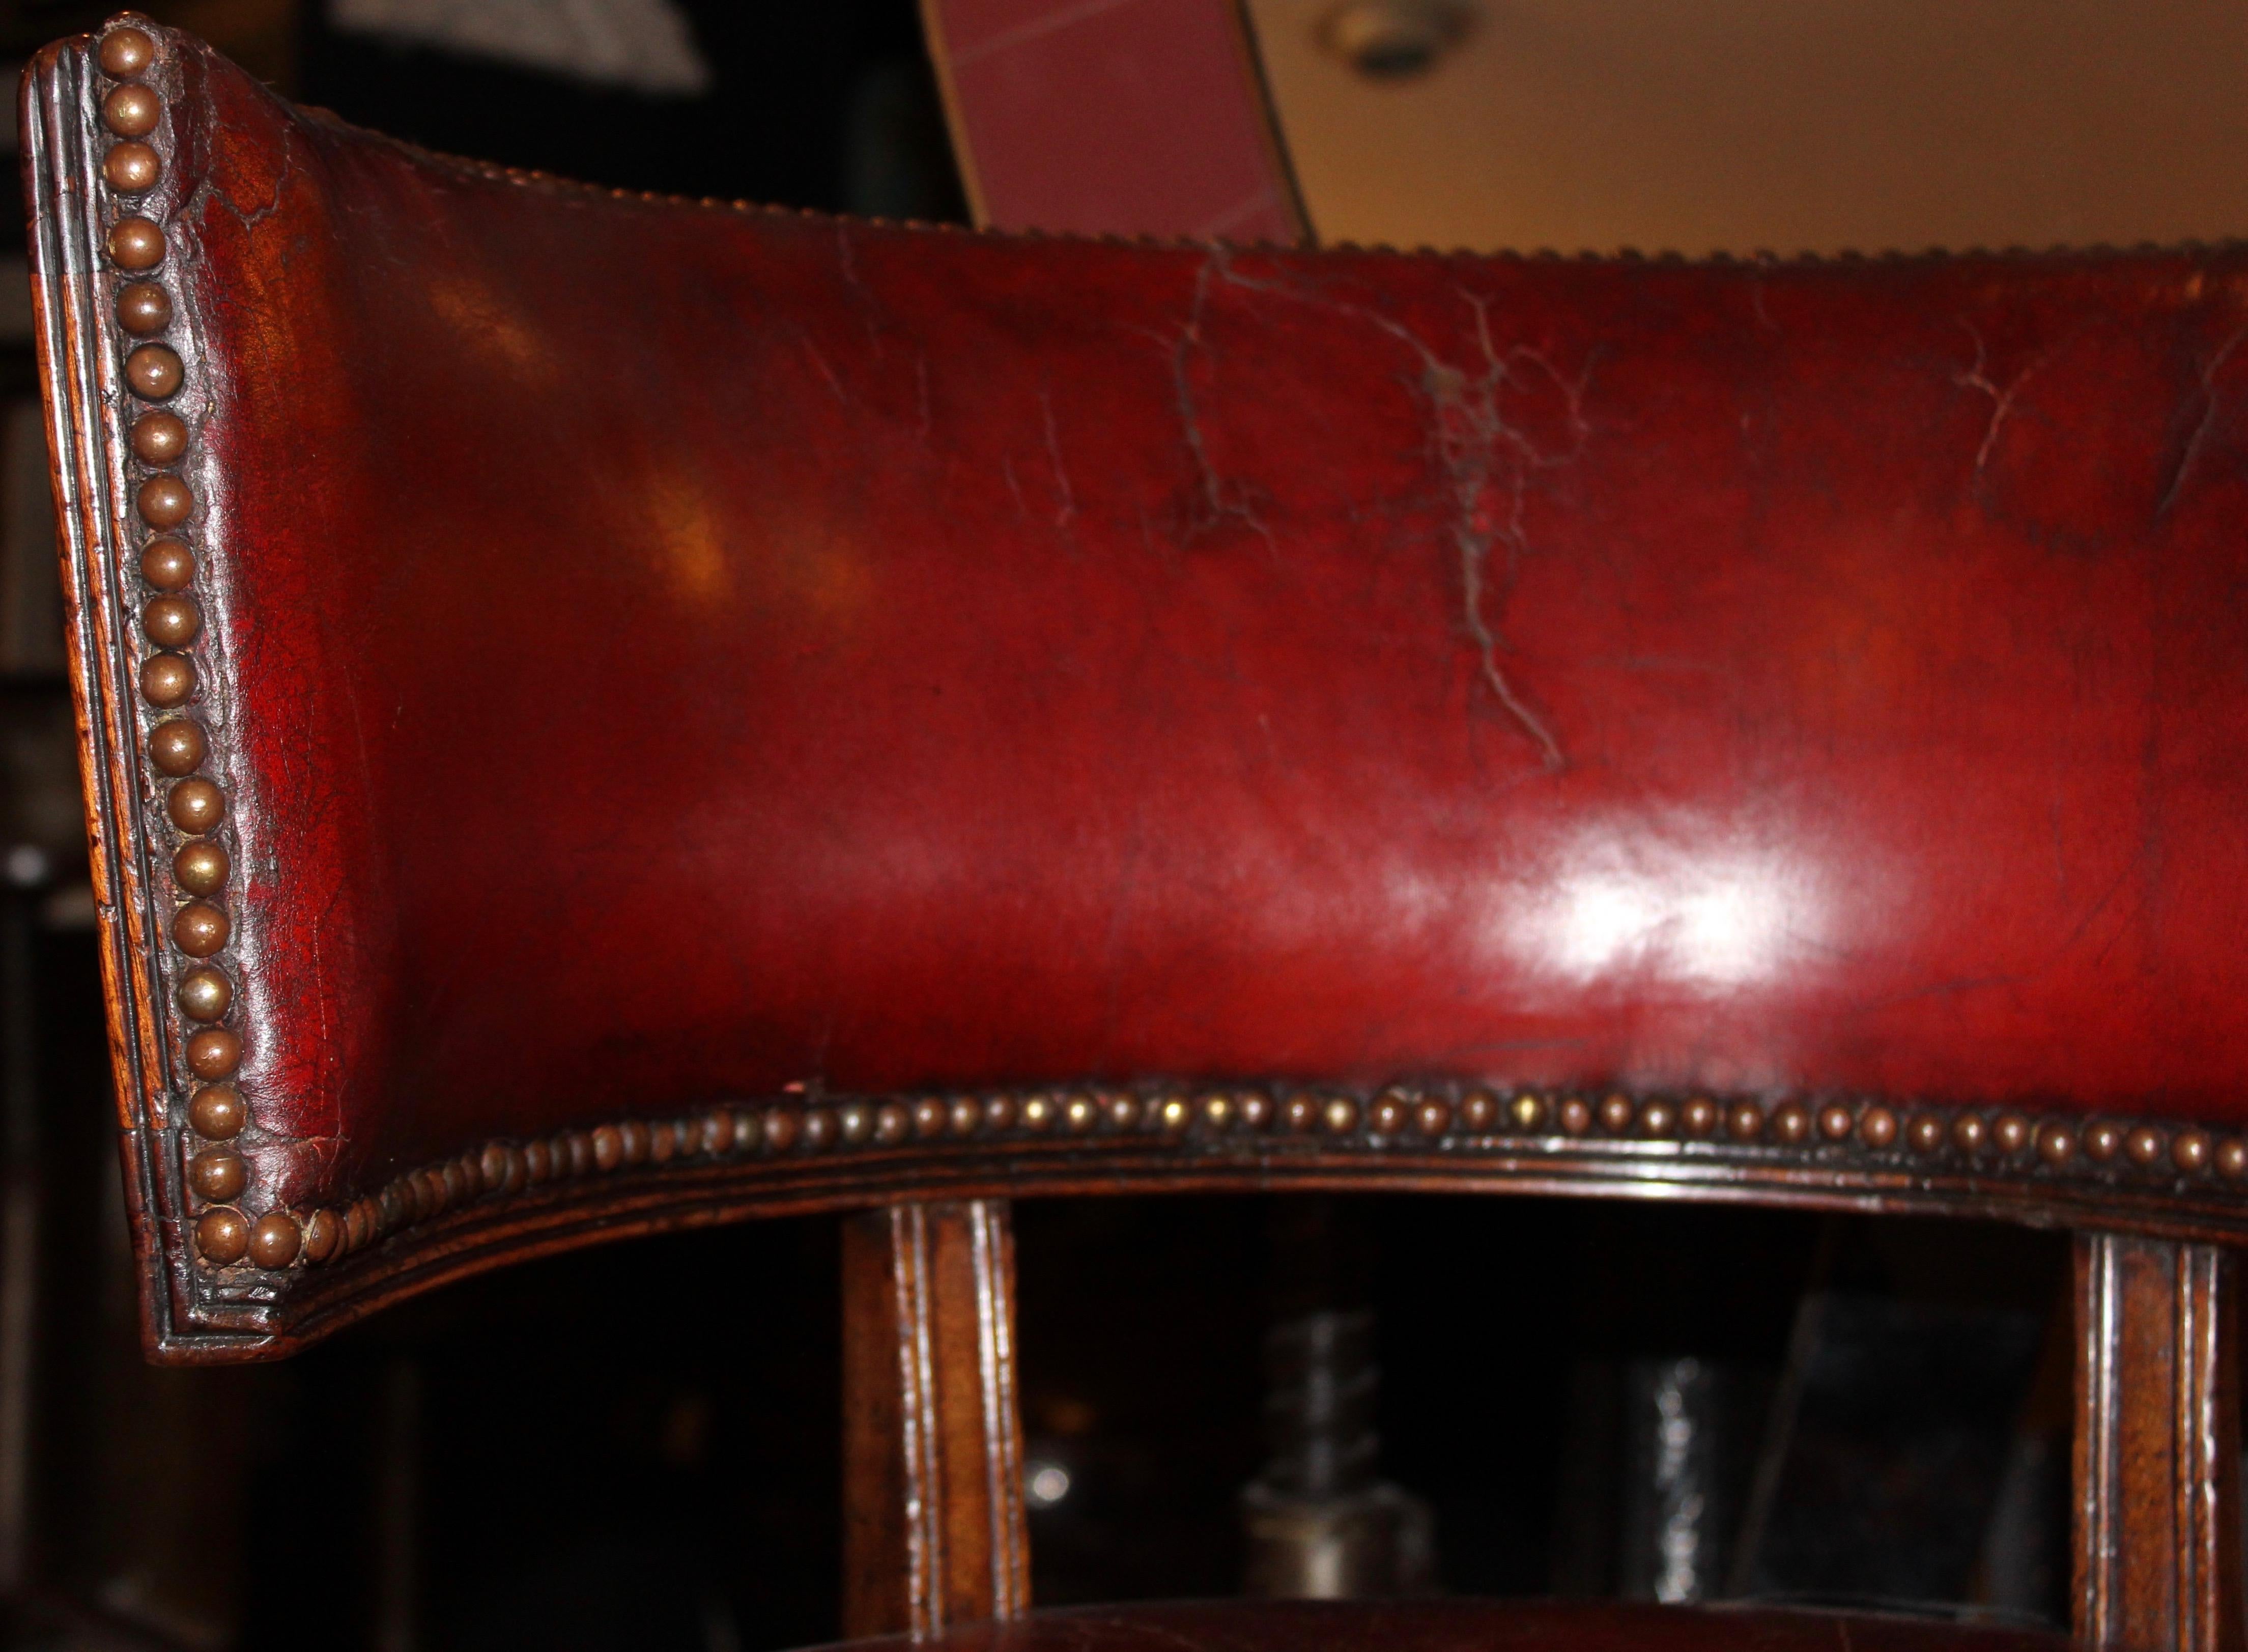 English William IV mahogany and aged red leather Klismos style desk chair, circa 1840. With turned tapered front legs and outwardly curved back legs. The aged red leather upholstery affixed with brass studwork. The curved back with further red